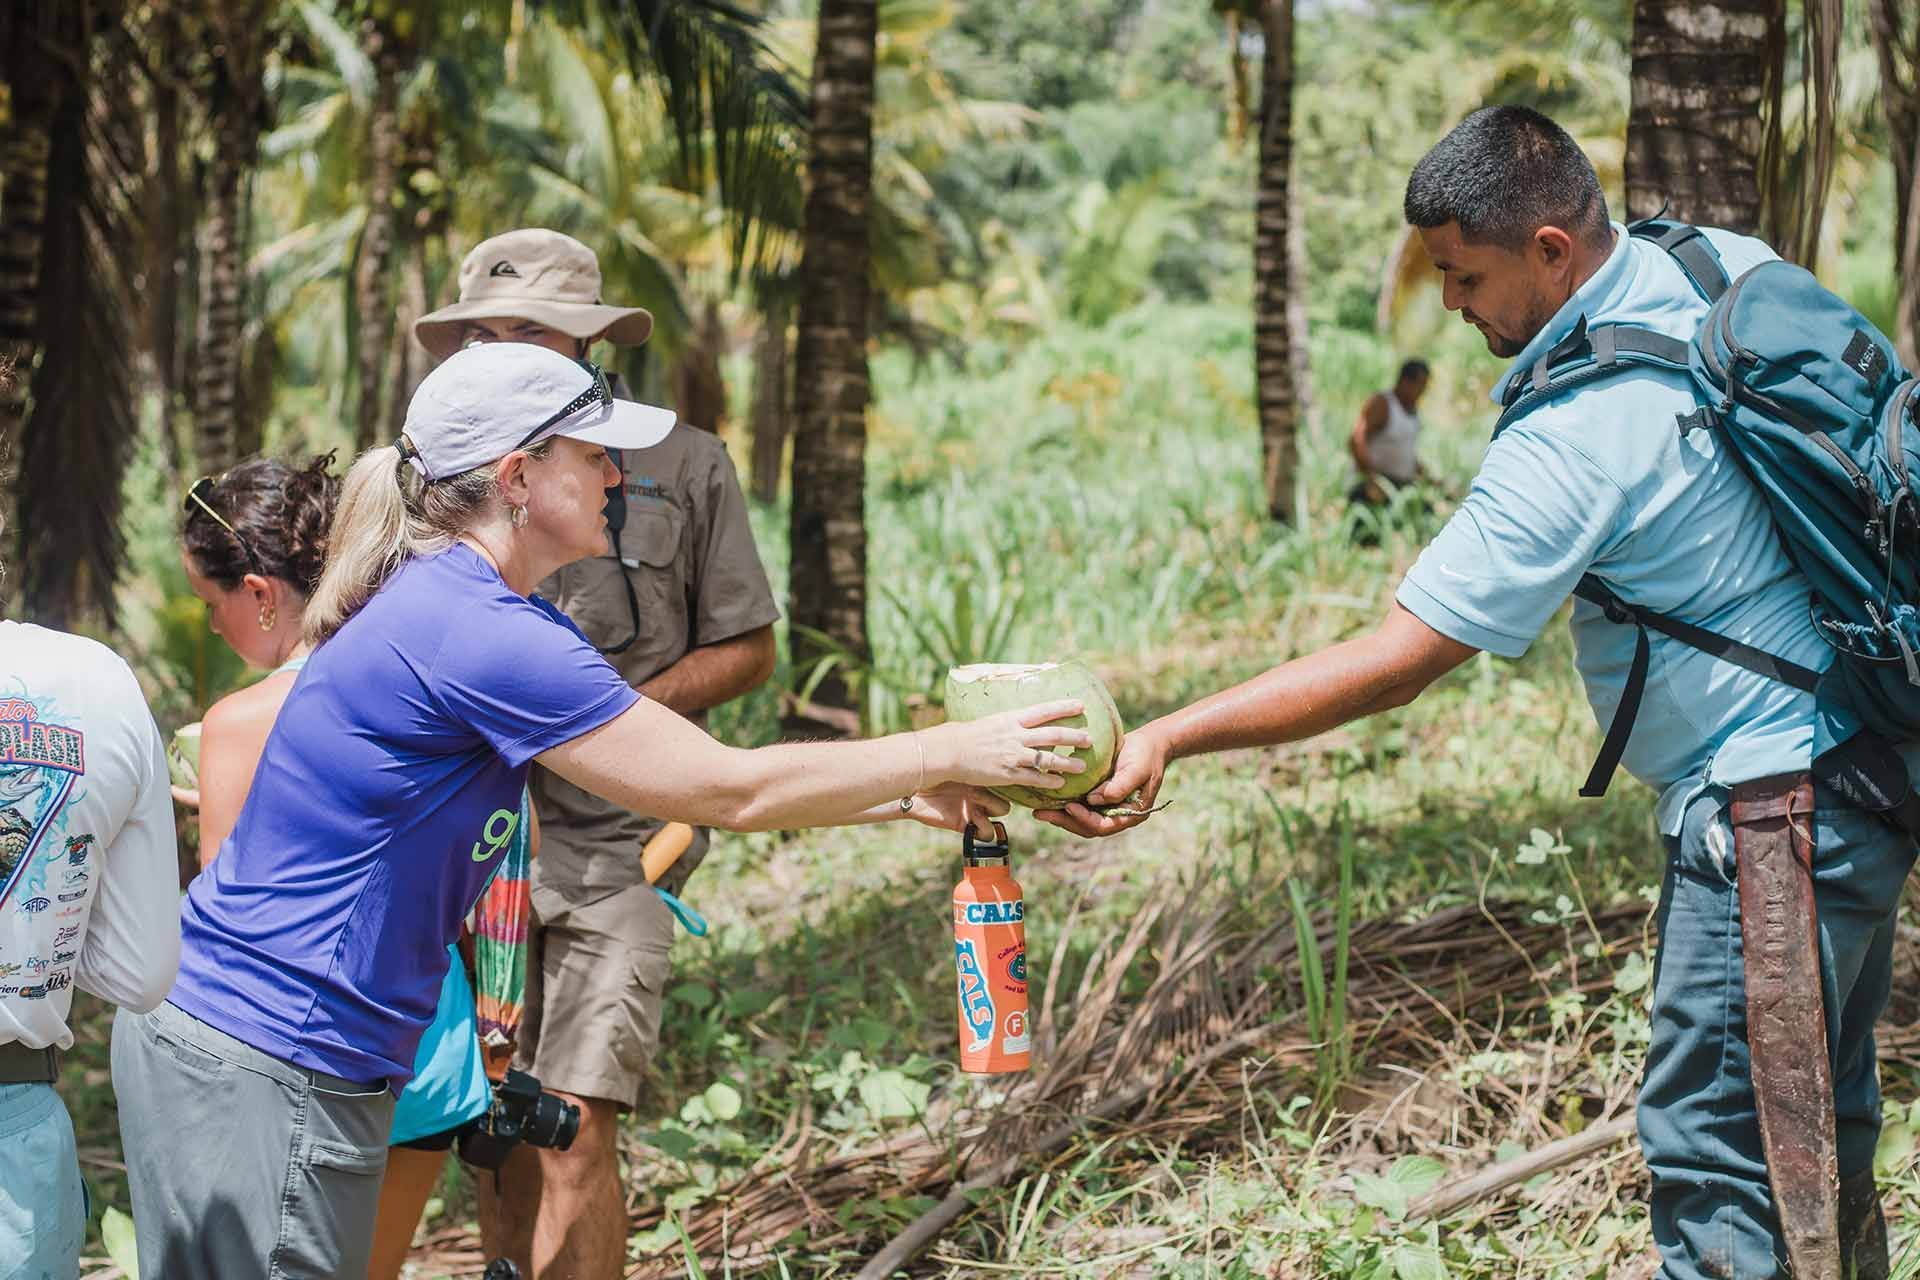 Cultural Connections with Farming Community in Belize